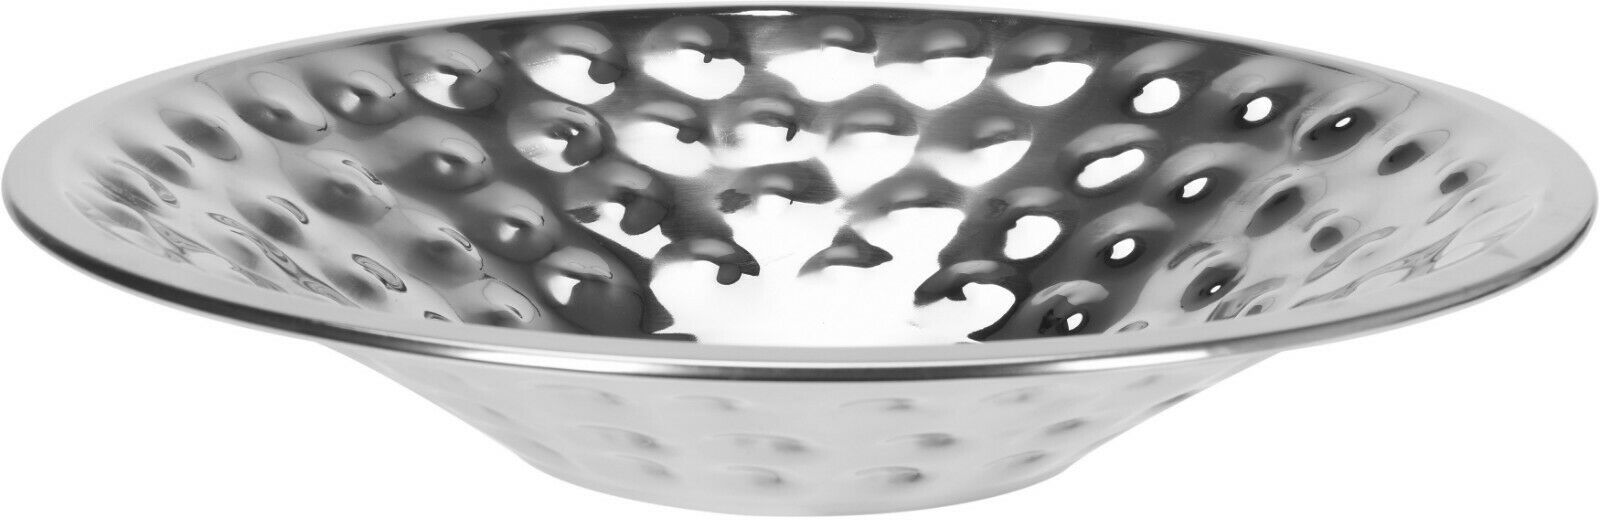 Very Large 36cm Stainless Steel Dimpled Fruit Bowl Wedding Table Centerpiece